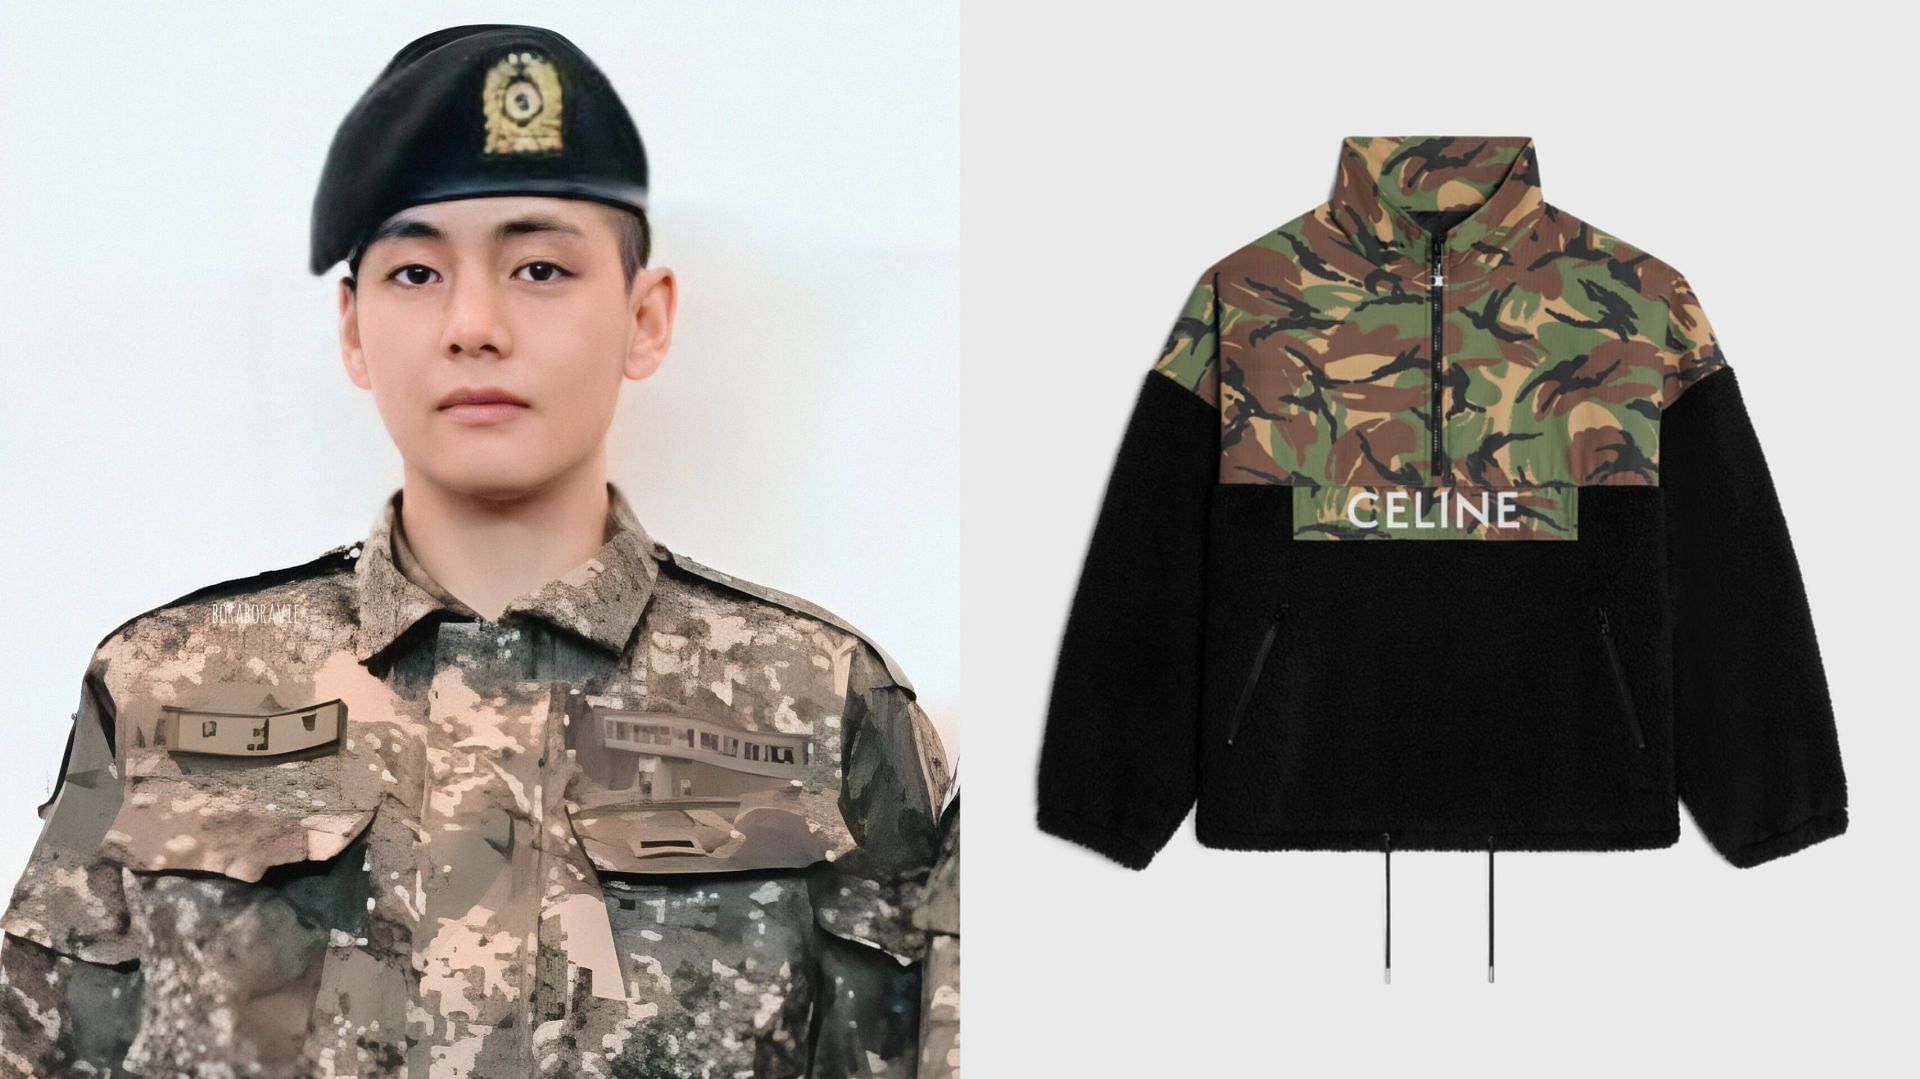 Featuring Kim Taehyung and the Celine Jacket (Image via rkive/Instagram and Celine Website)